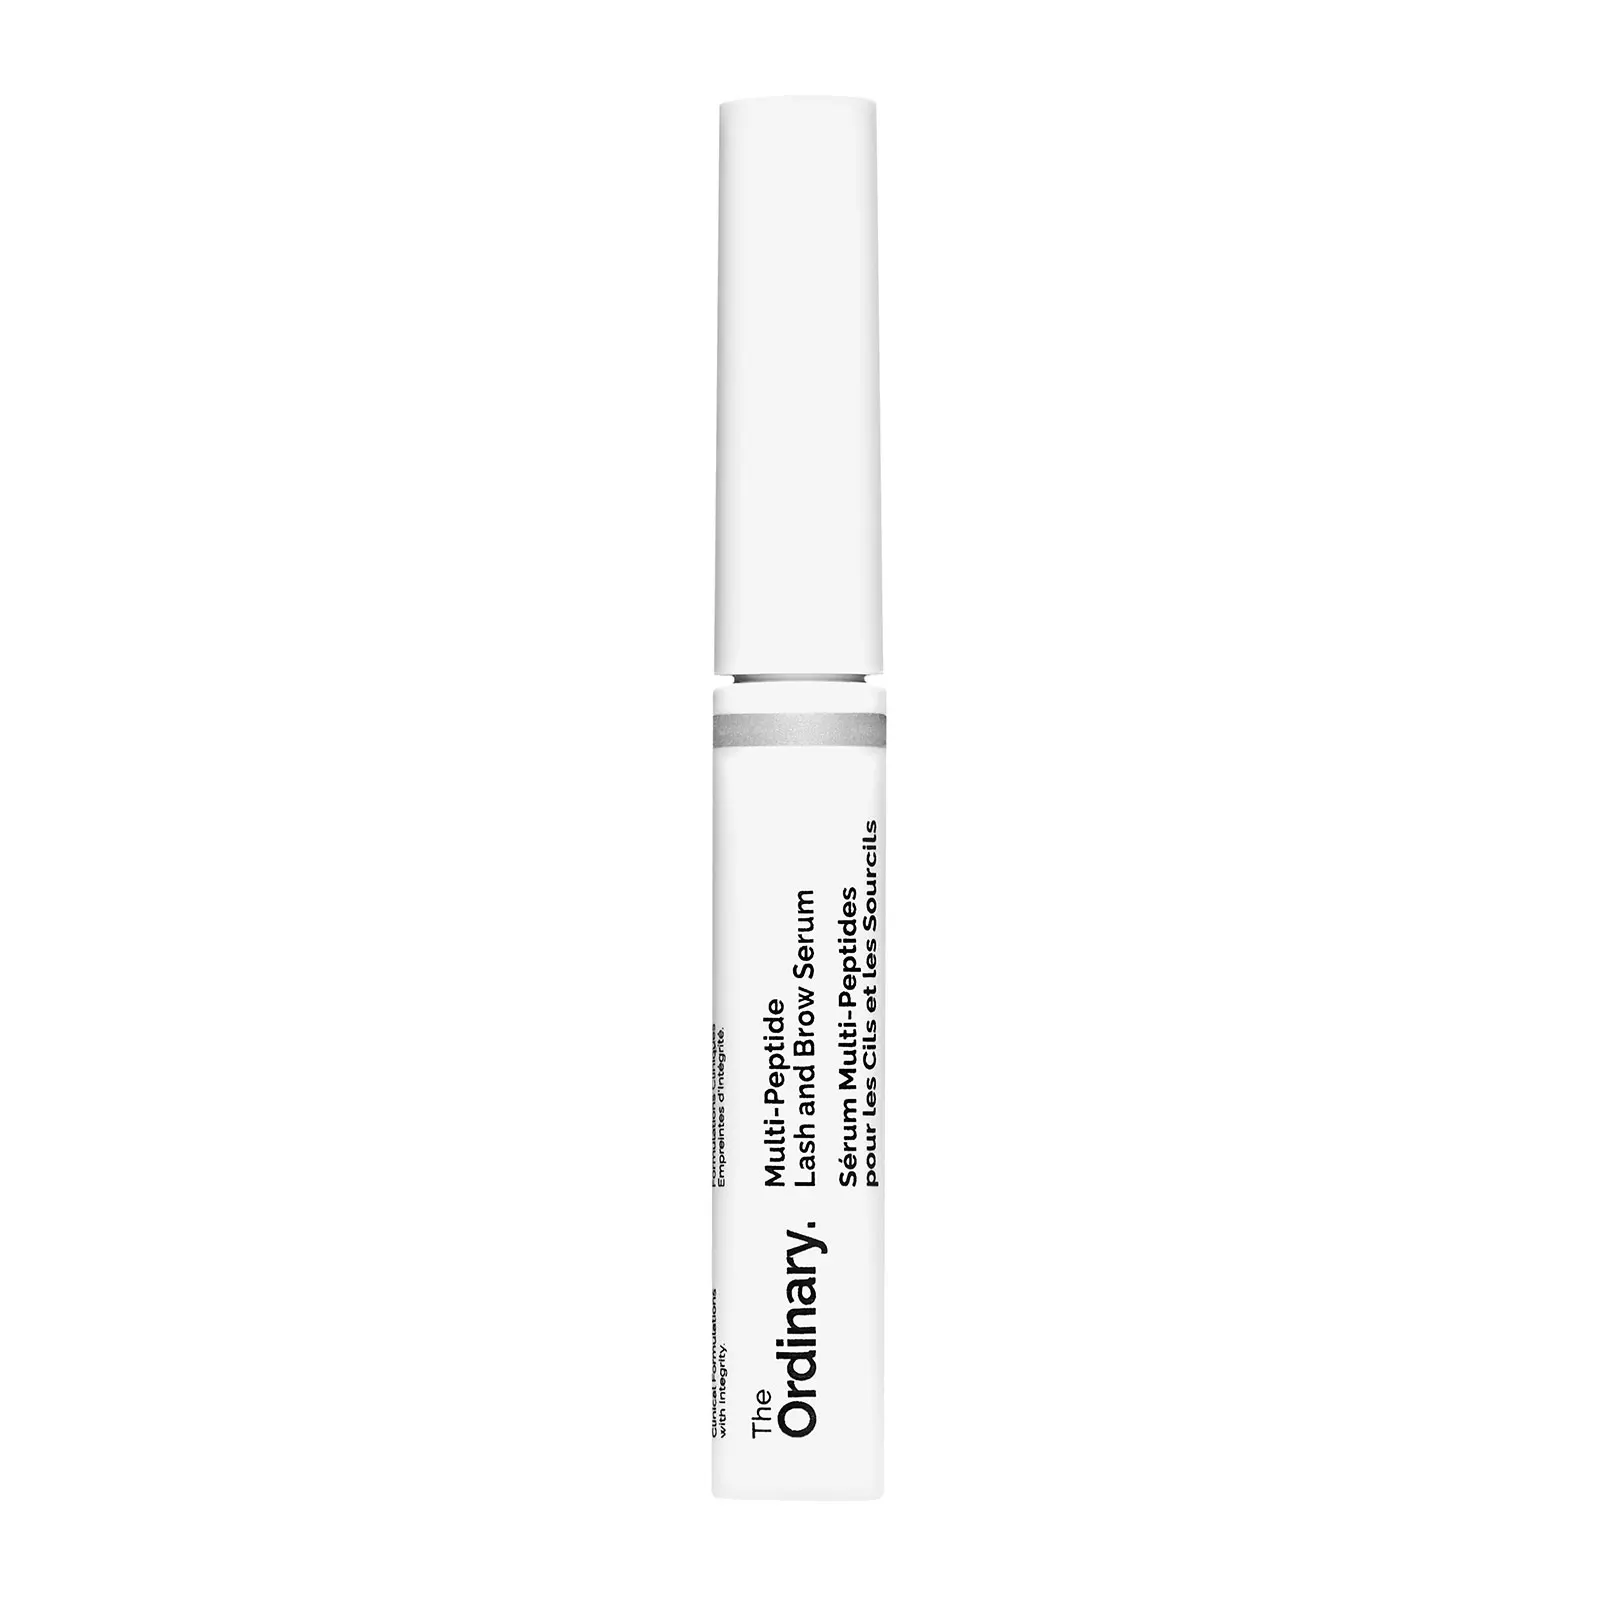 The Ordinary Multi-Peptide Lash and Brow Serum 5g Discounts and Cashback